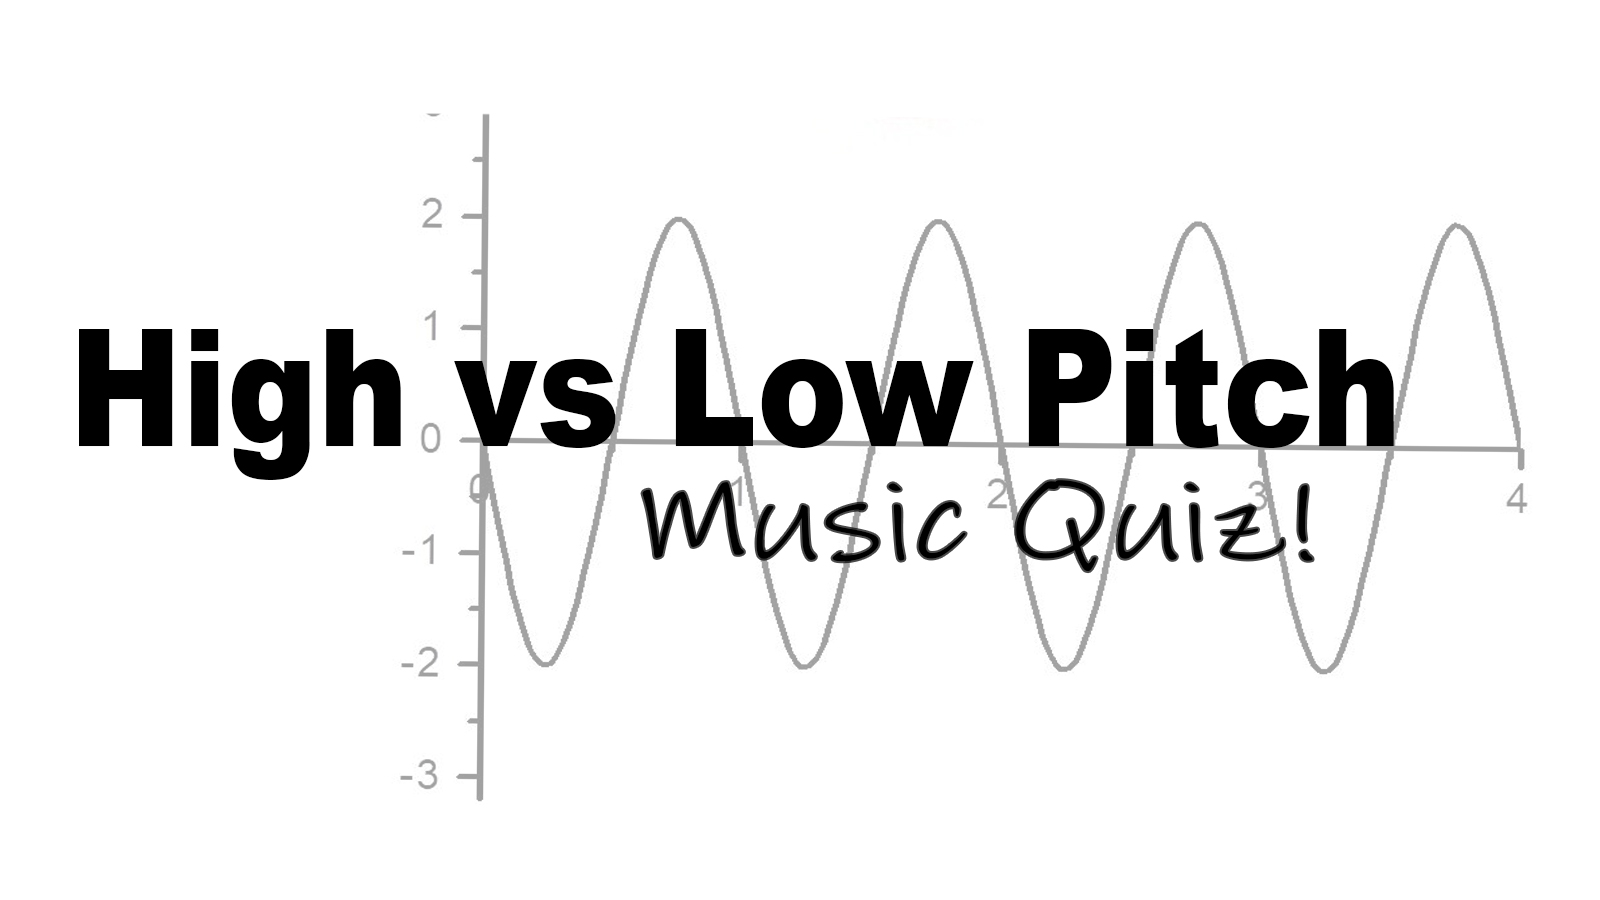 High or Low Pitch: A Fun Quiz on Sound Waves in Music